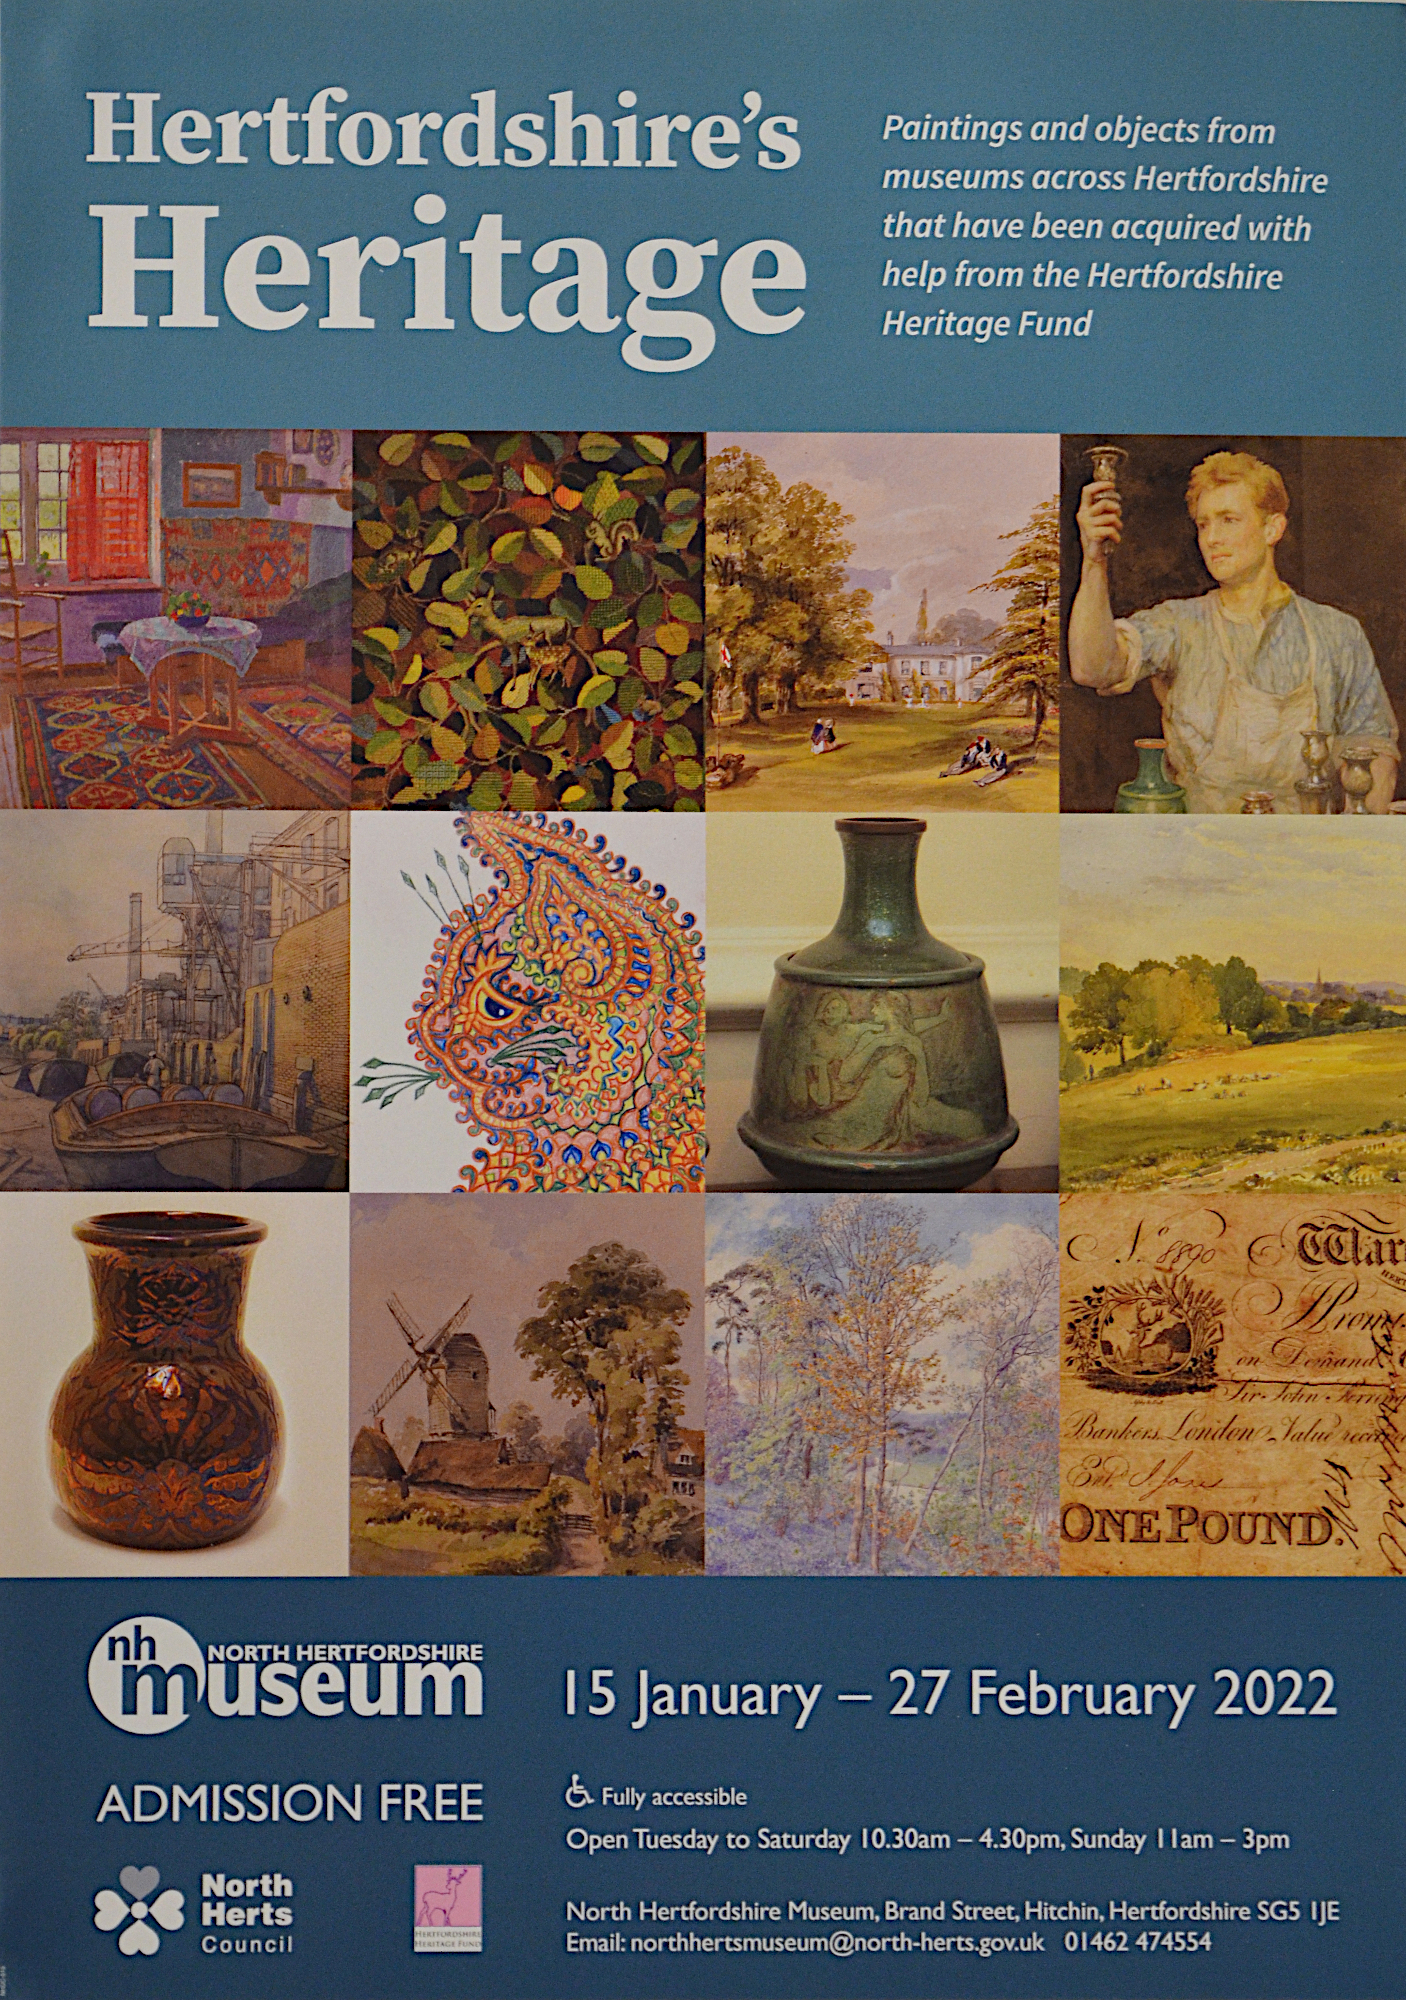 Poster for exhibition, depicting several objects funded by HHF.